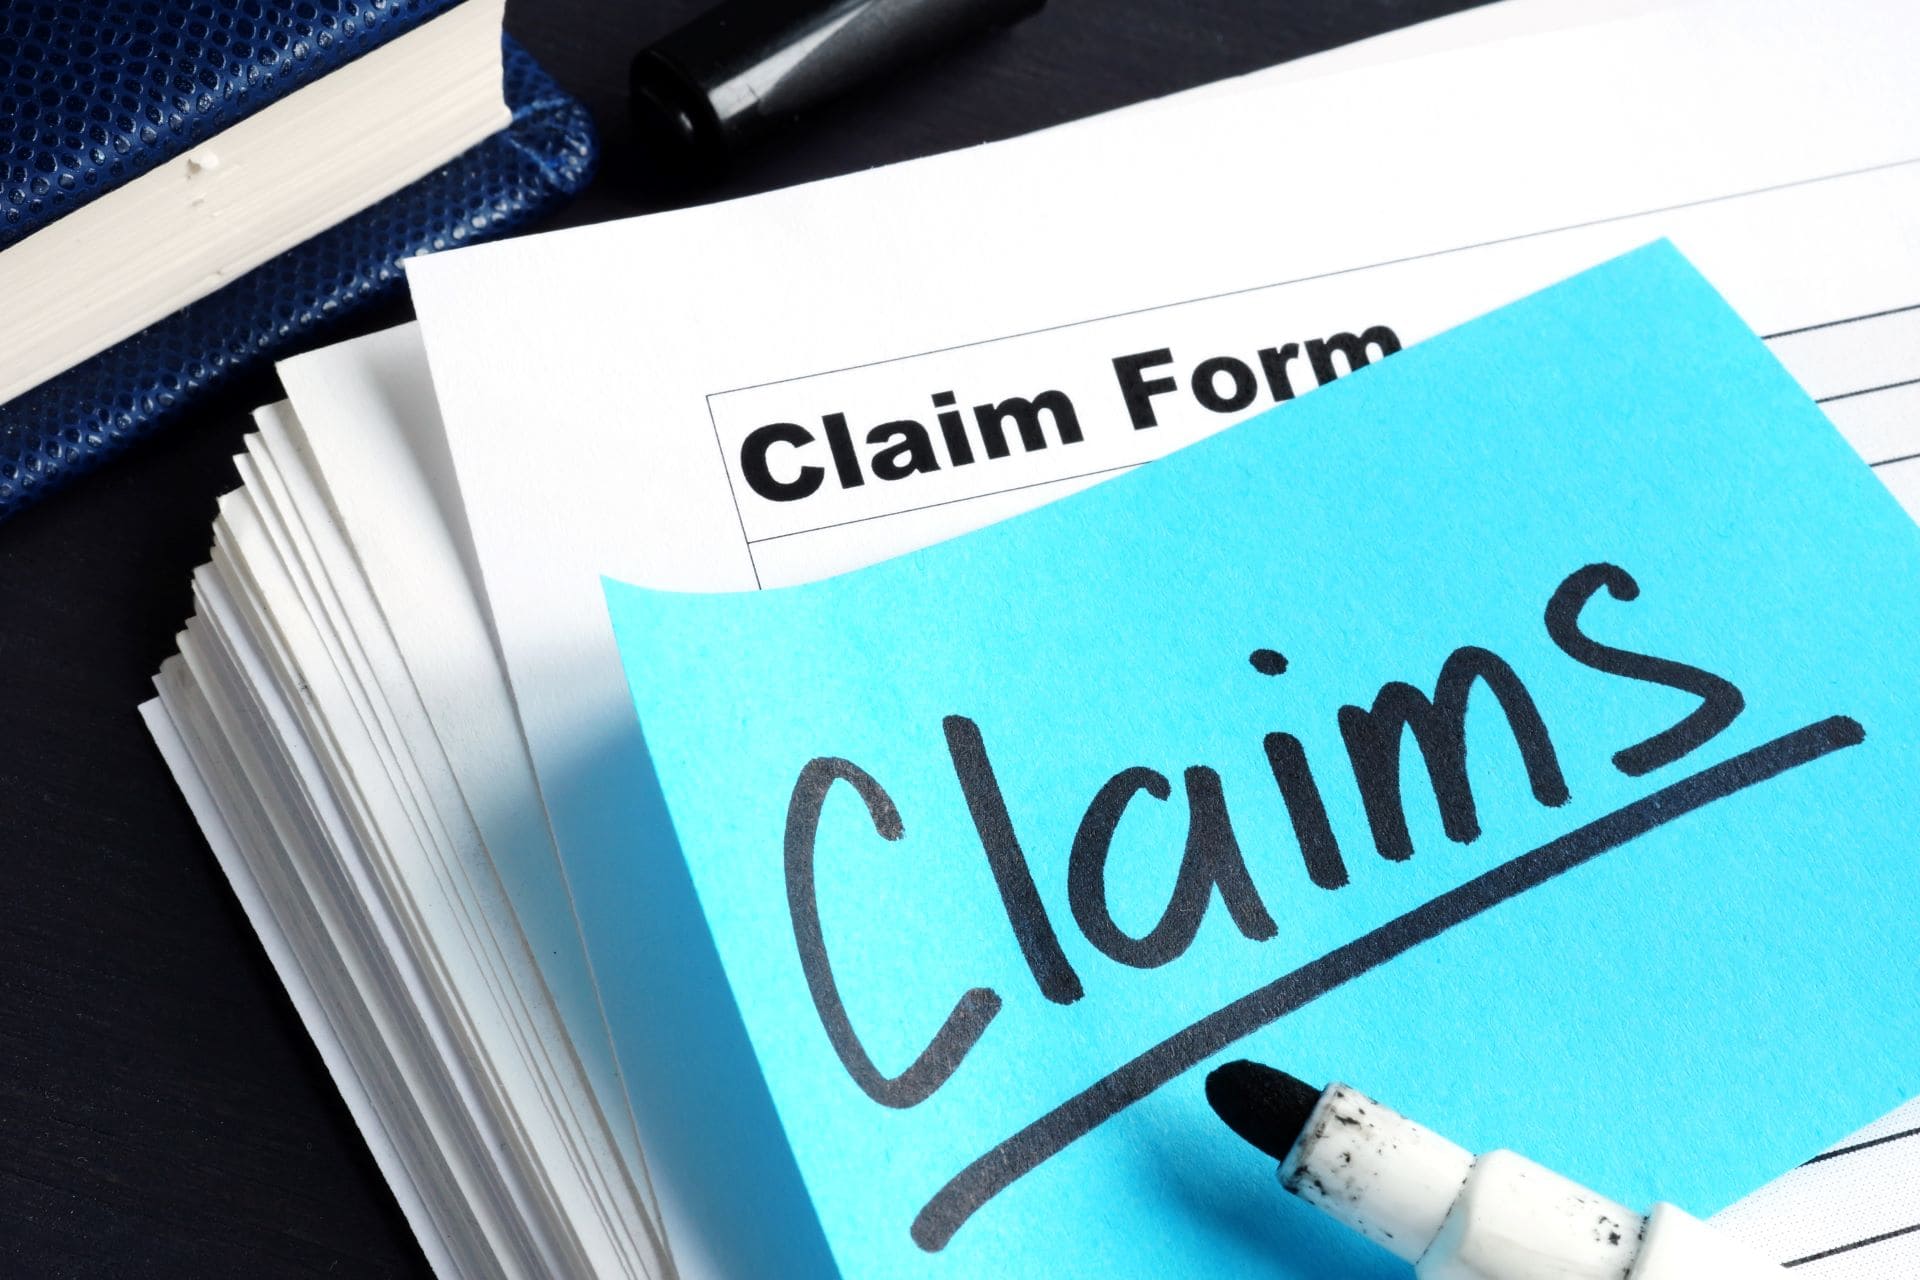 Are An Insurance Company's Claims Documents Attorney Client Privileged? 